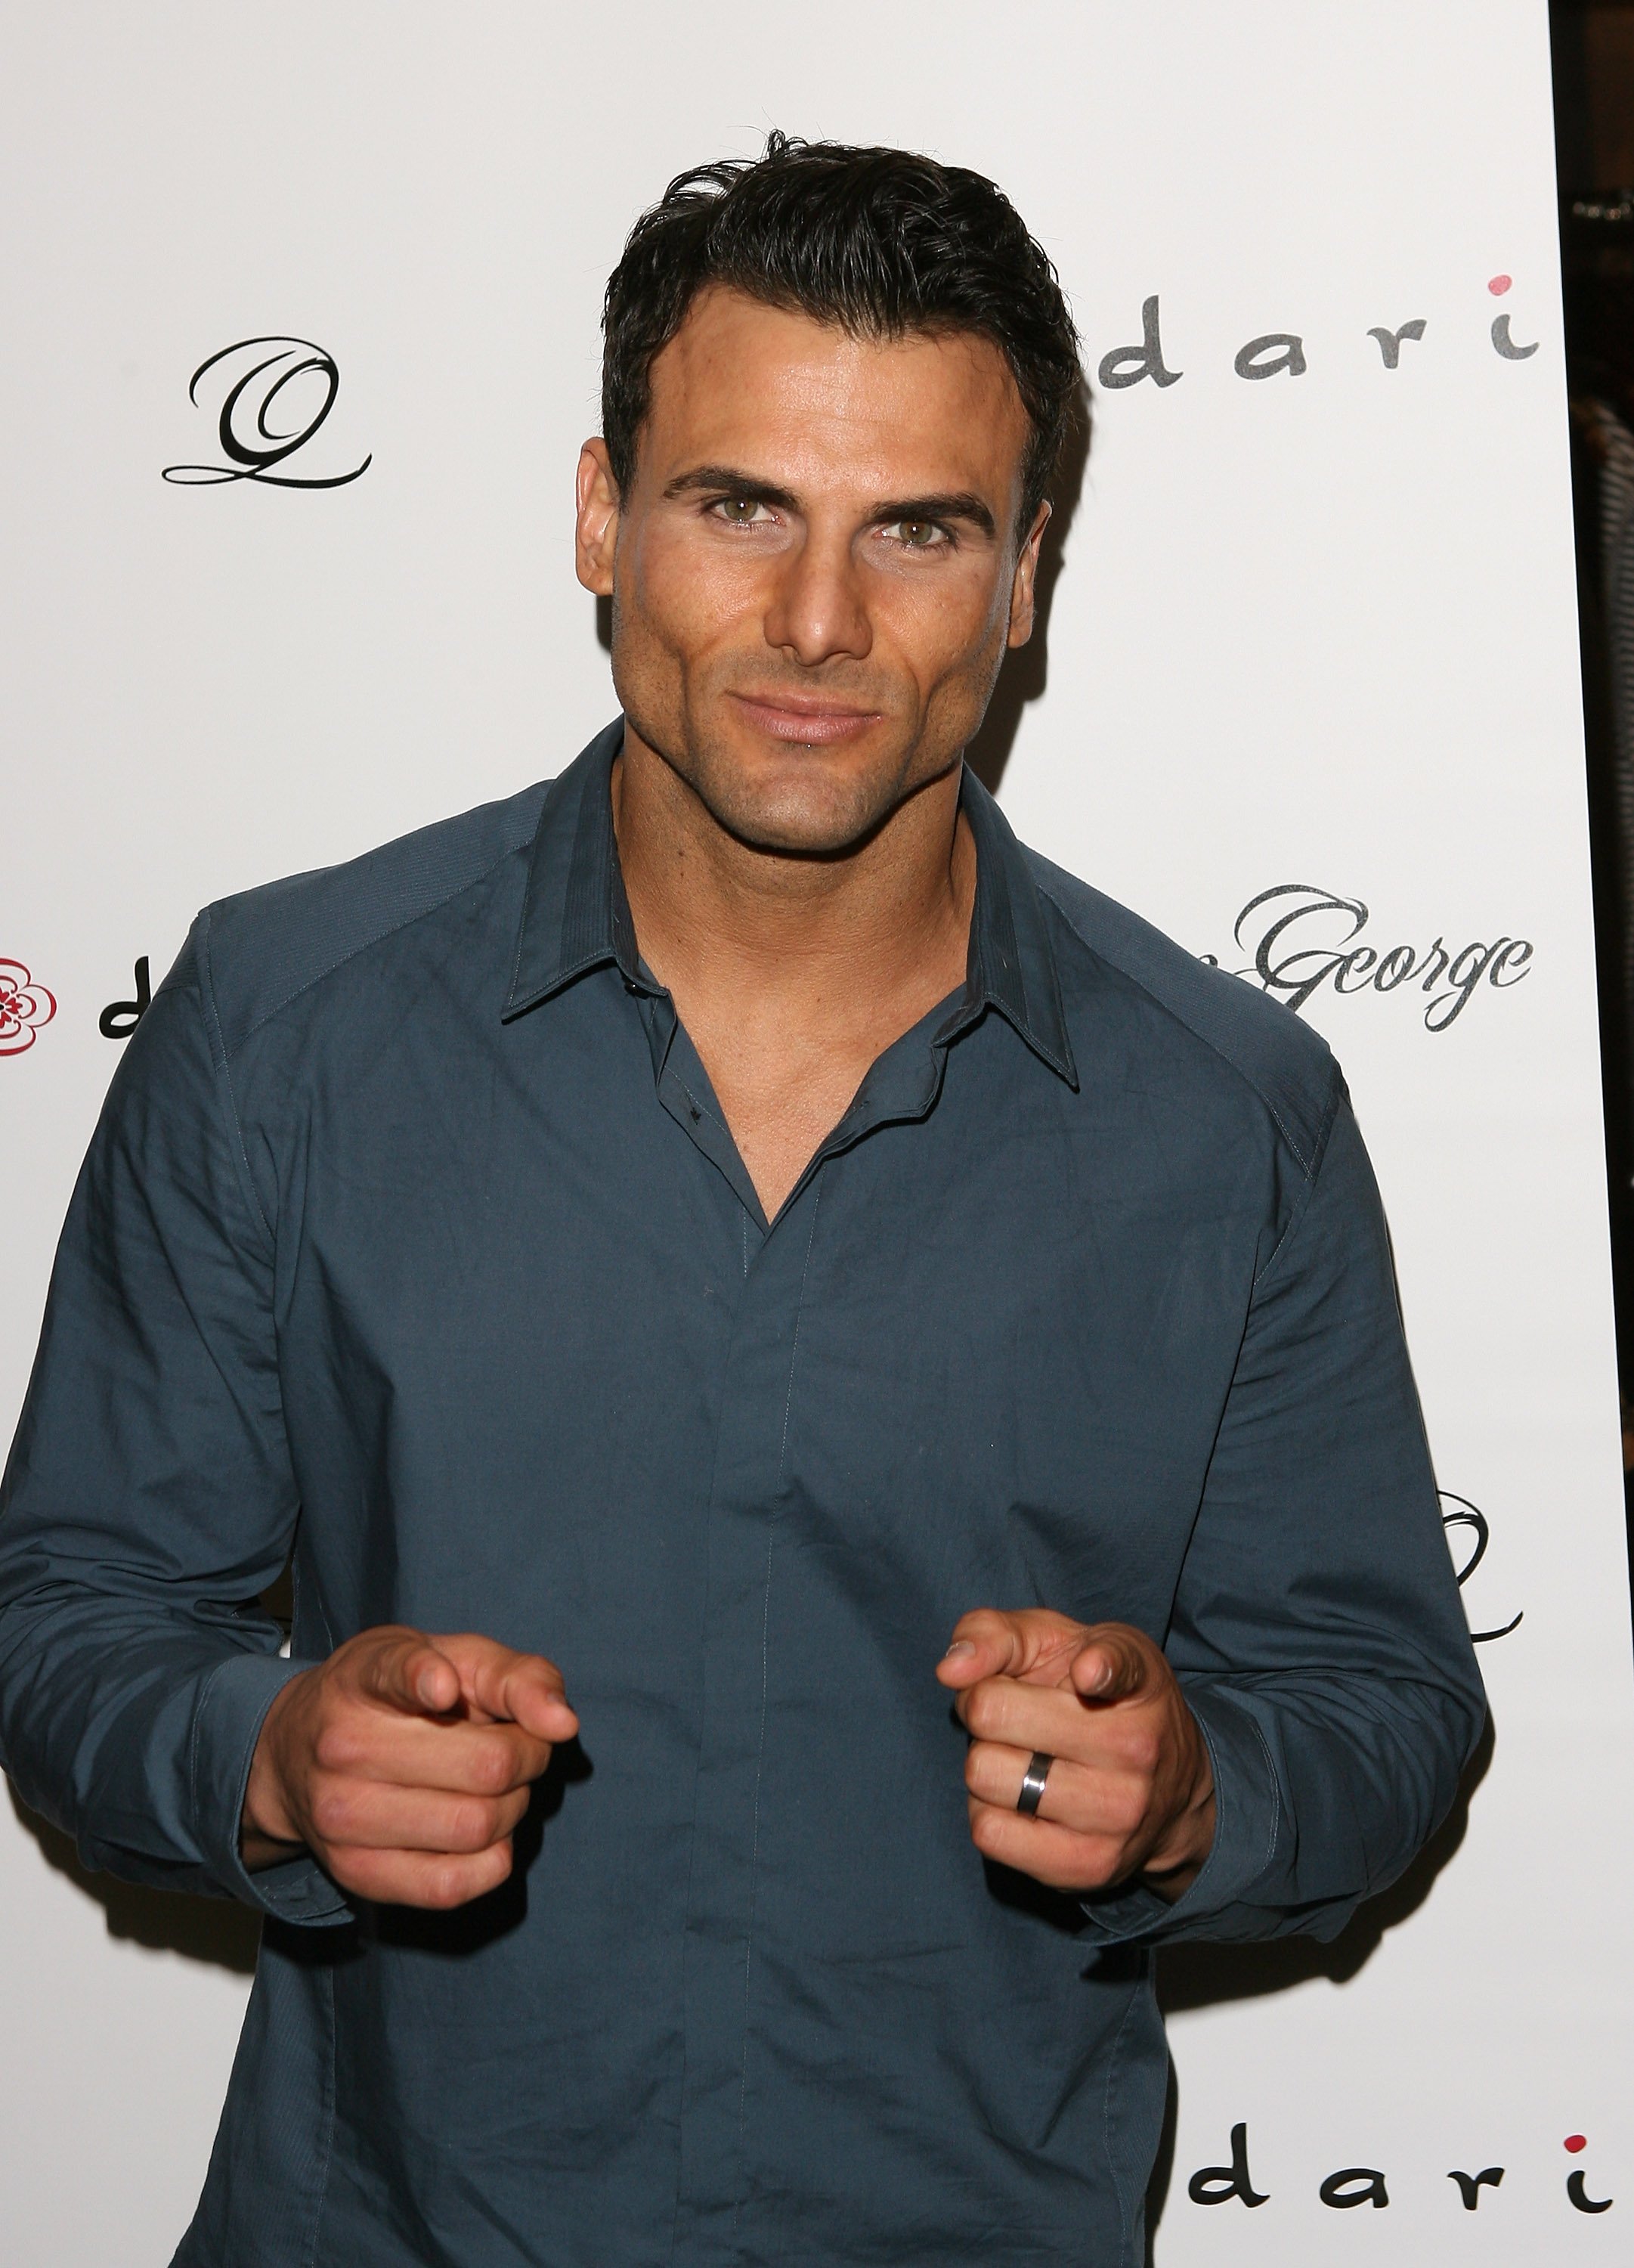 Jeremy Jackson attends the "Q" Jewelry Line Launch Party at Dari Boutique on January 23, 2012 in Studio City, California. | Source: Getty Images